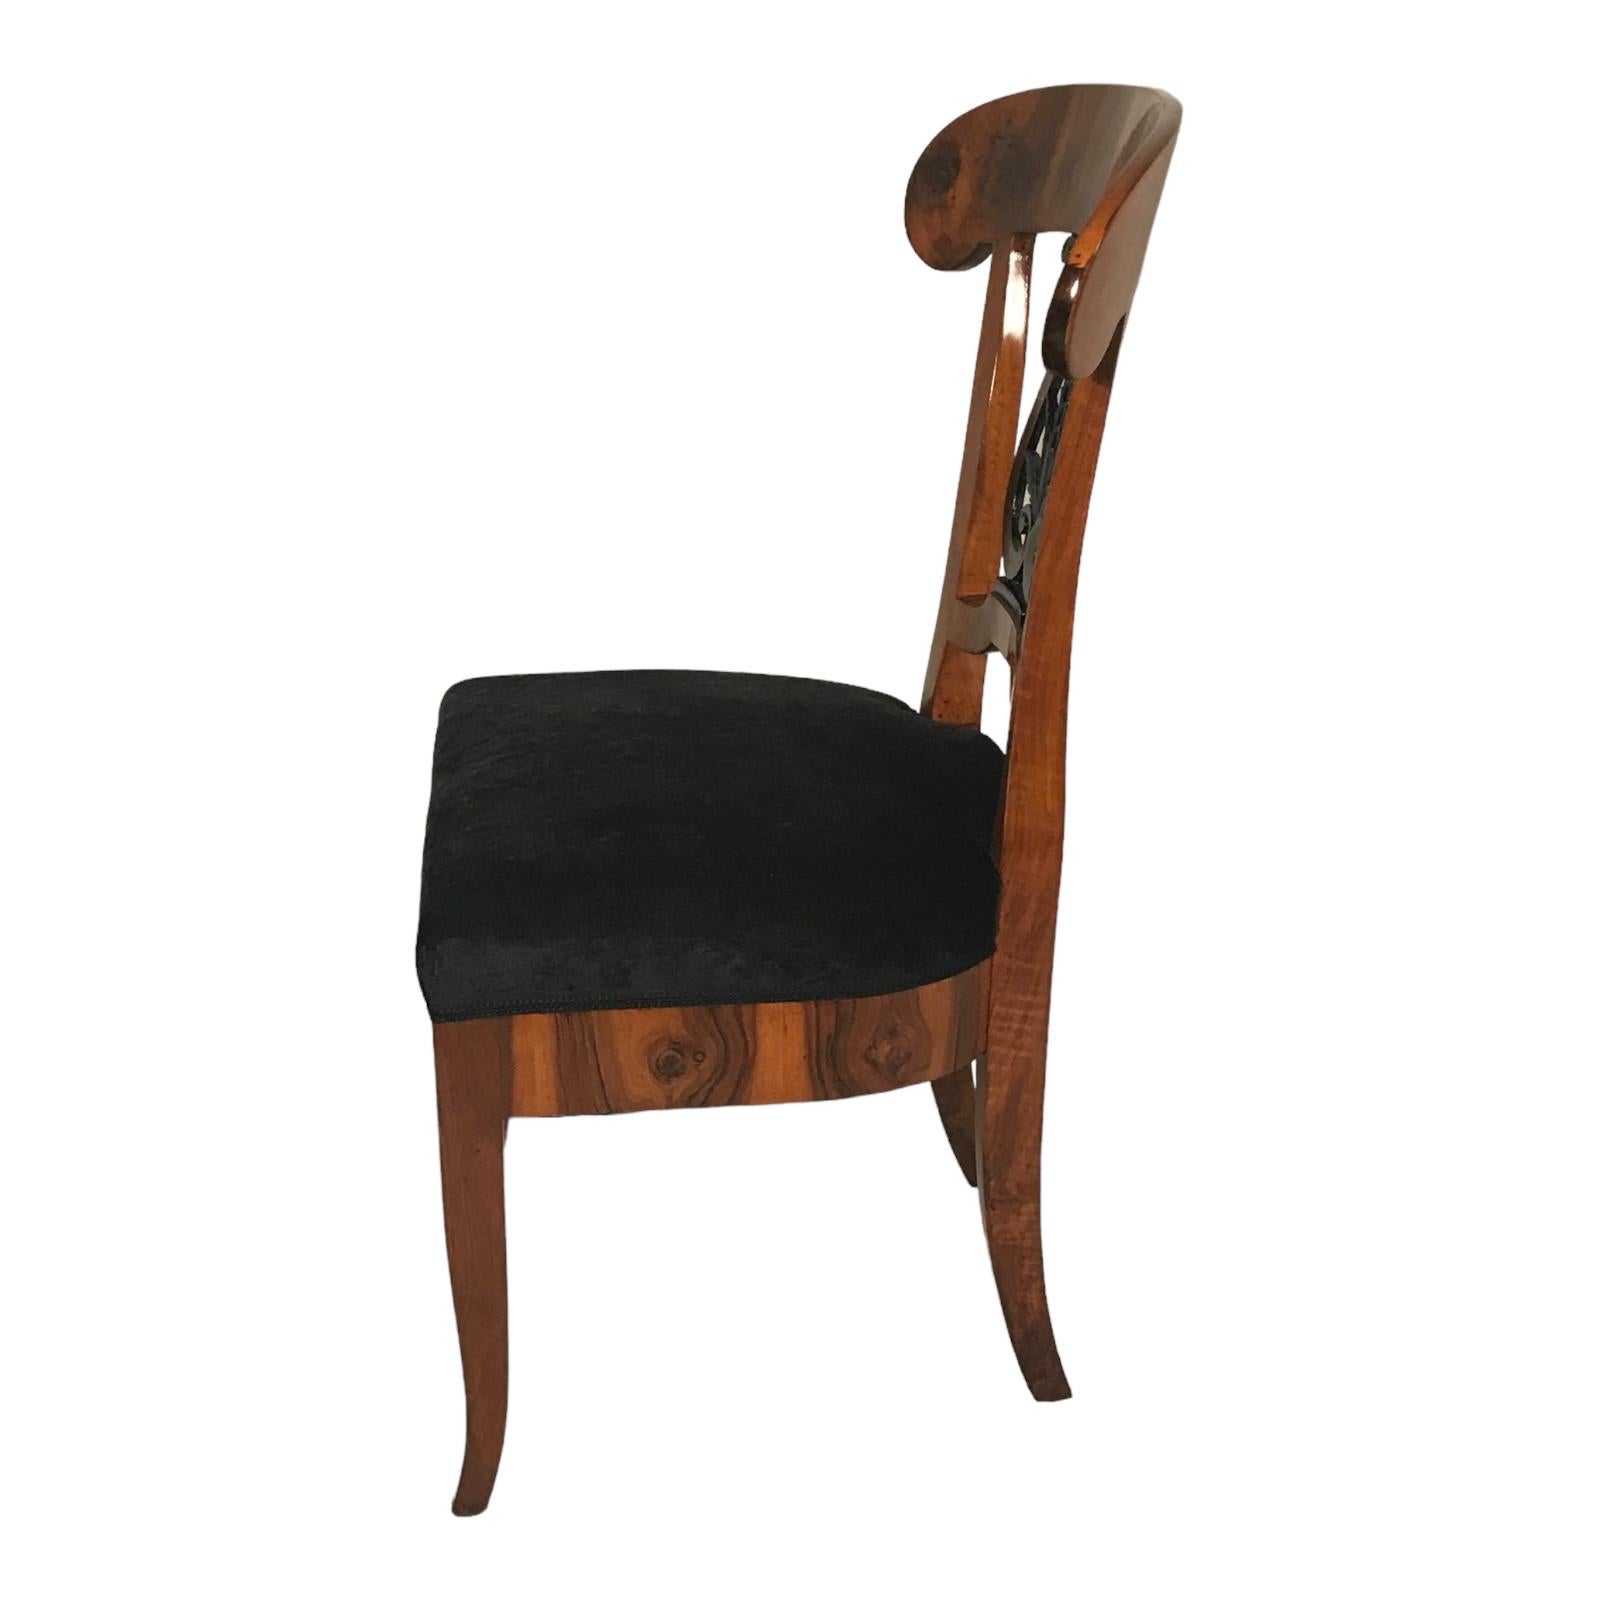 Explore our stunning pair of original Biedermeier chairs, originating from 1820s Southern Germany. Crafted with gorgeous walnut veneer, these chairs boast an exquisite back design accented with ebonized open work leaf decor. Meticulously refinished